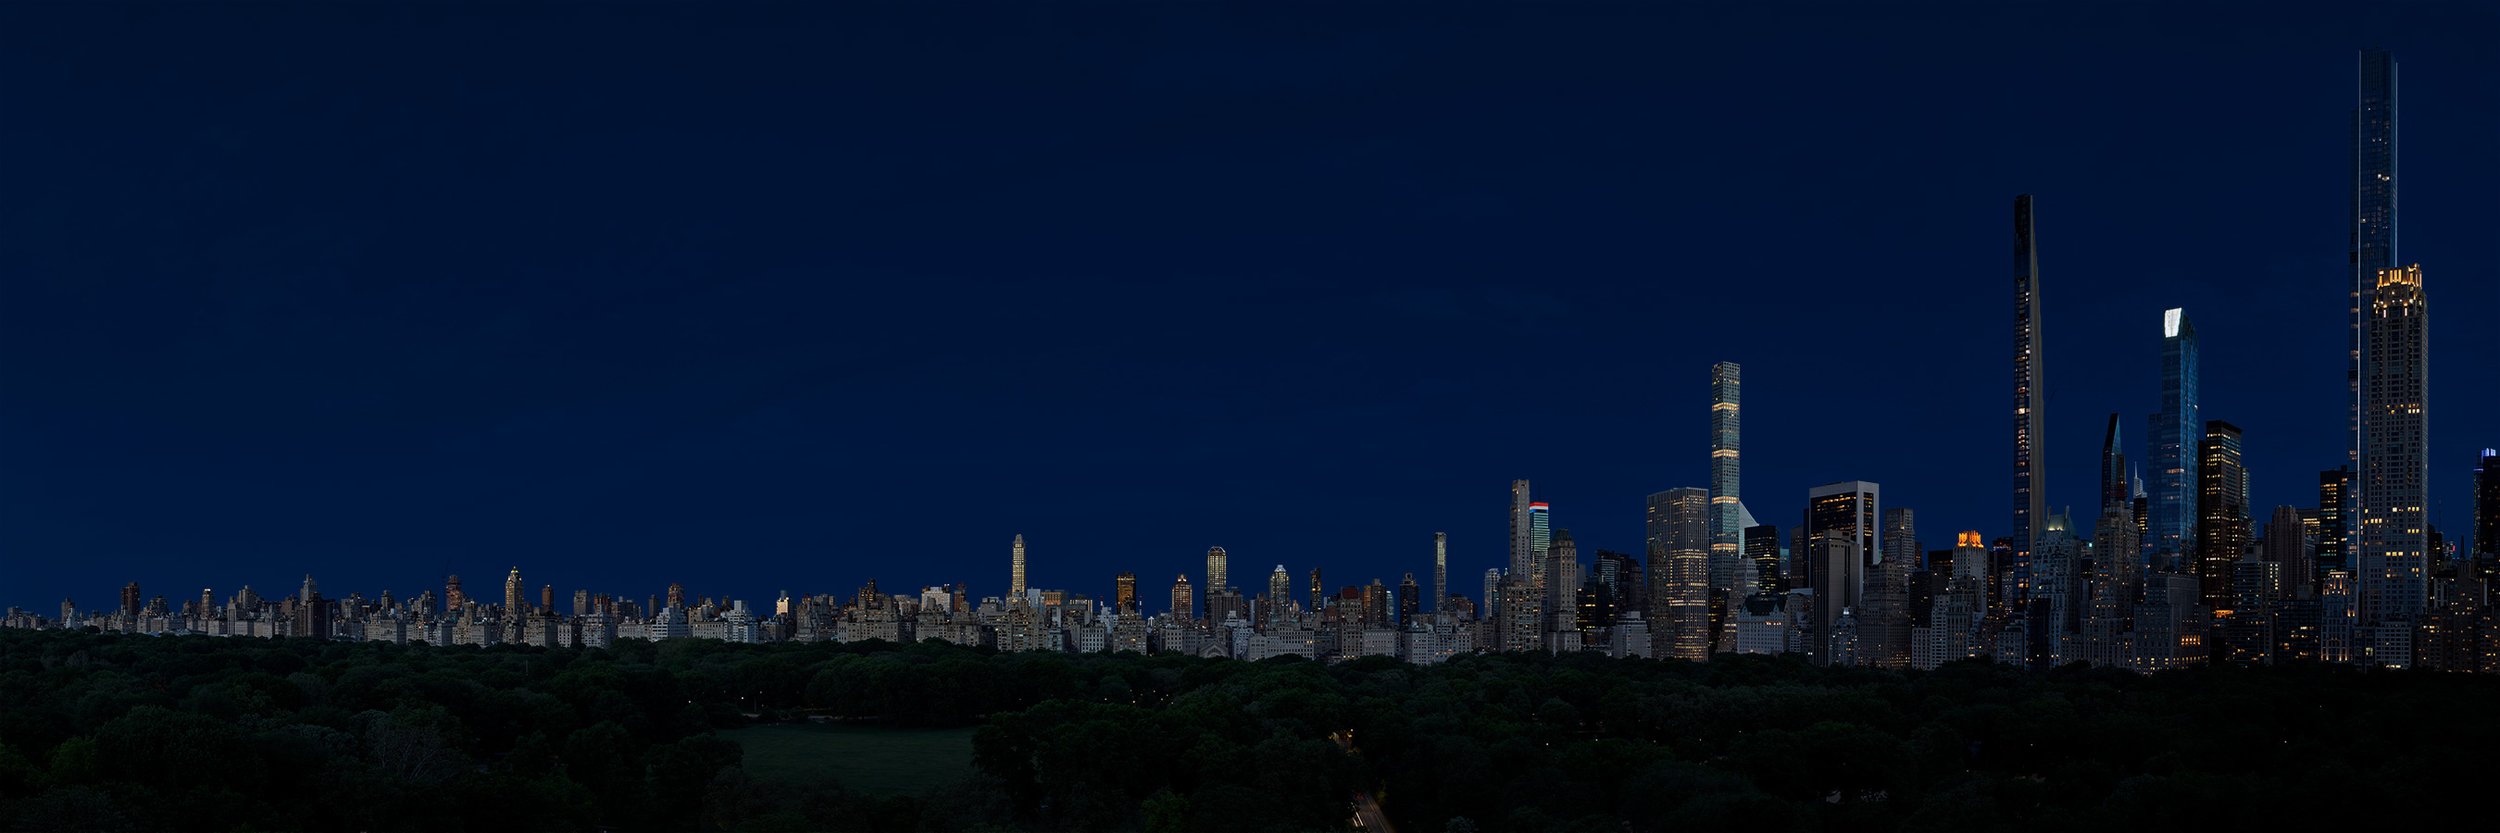 New-York-City-May-2021-Central-Park-West-Night.jpg